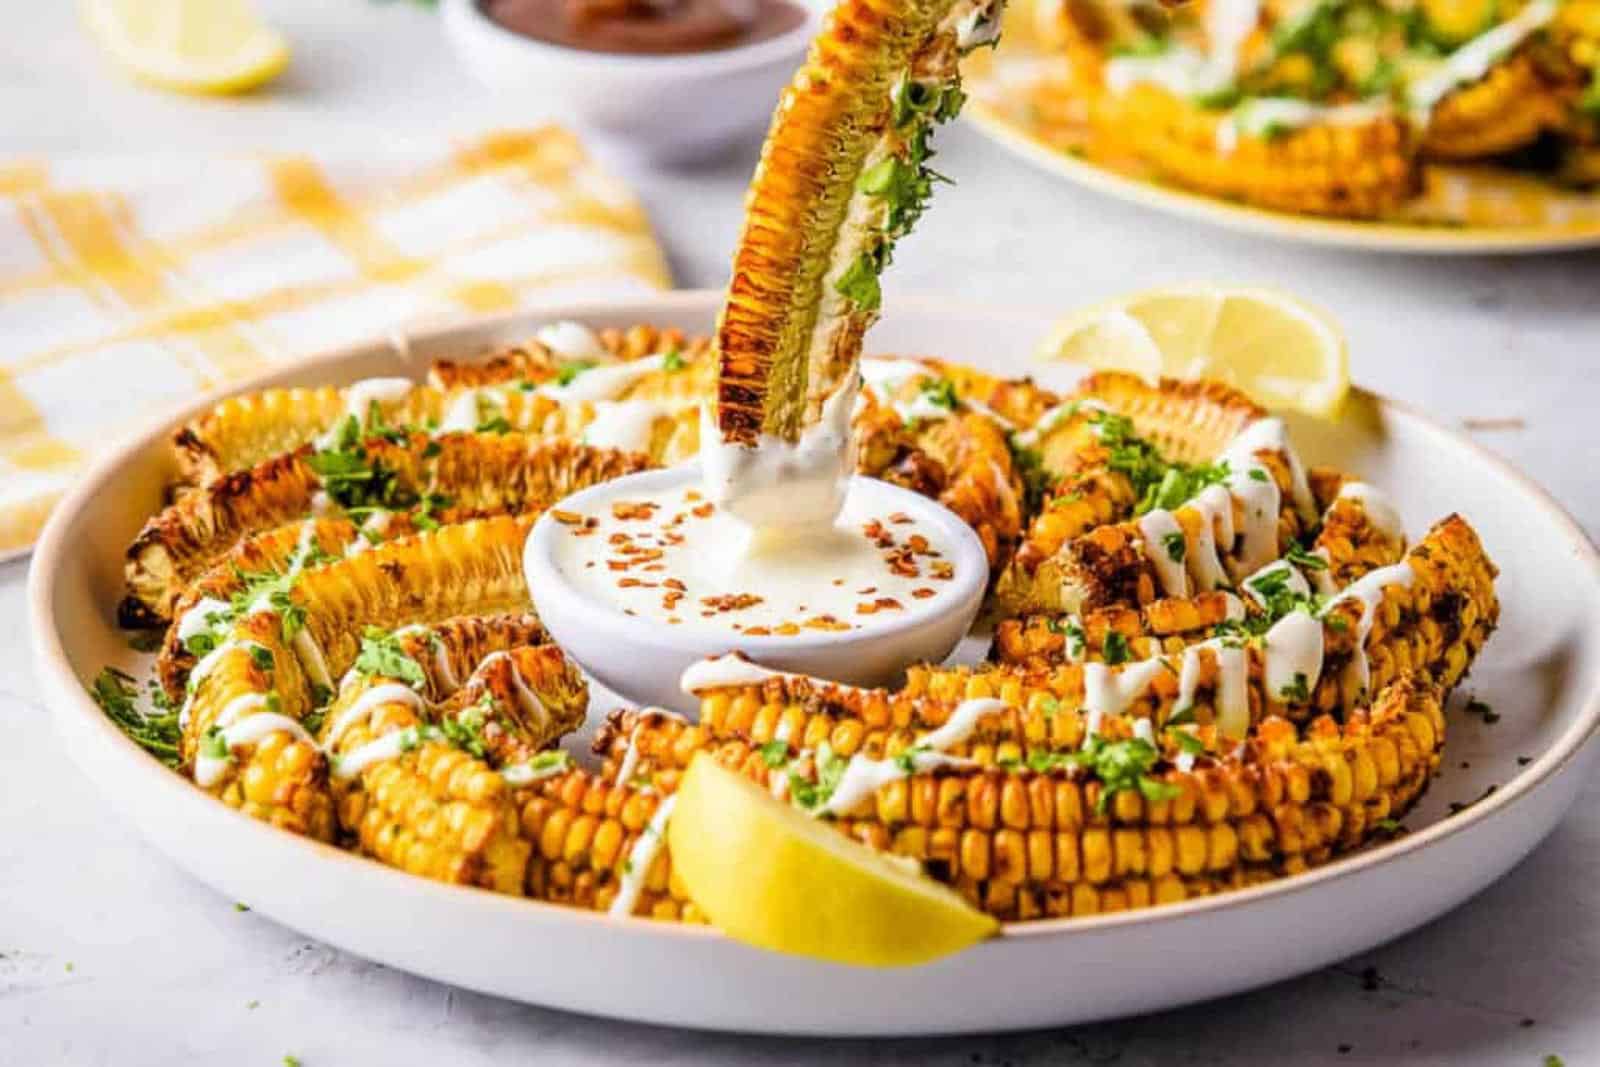 Corn ribs with fresh herbs being dipped into a creamy sauce.